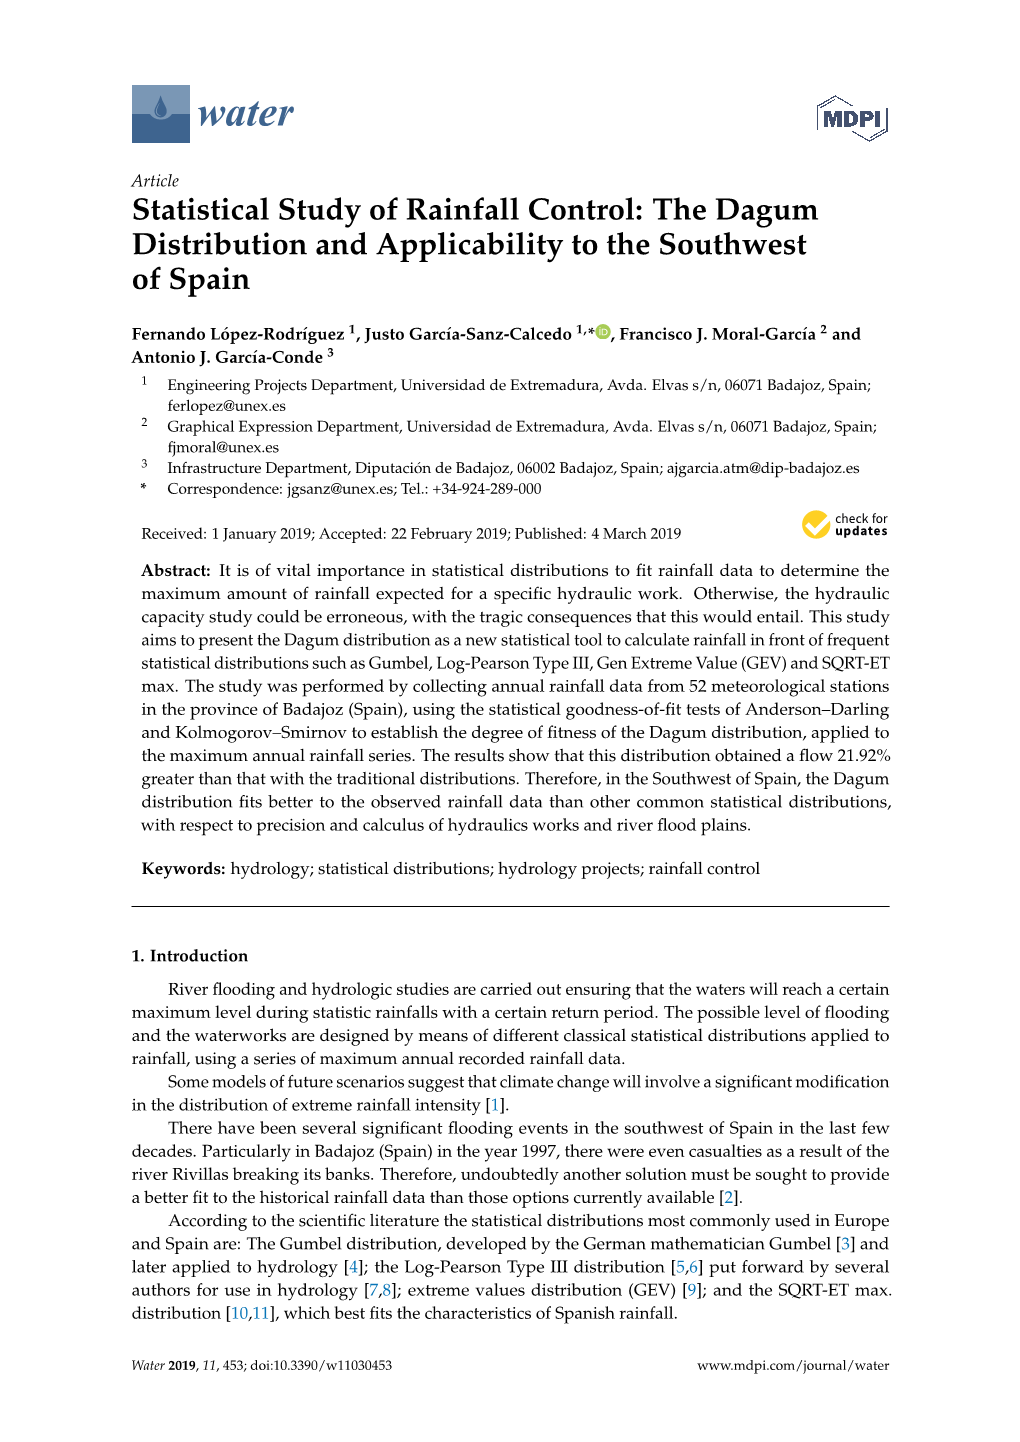 Statistical Study of Rainfall Control: the Dagum Distribution and Applicability to the Southwest of Spain